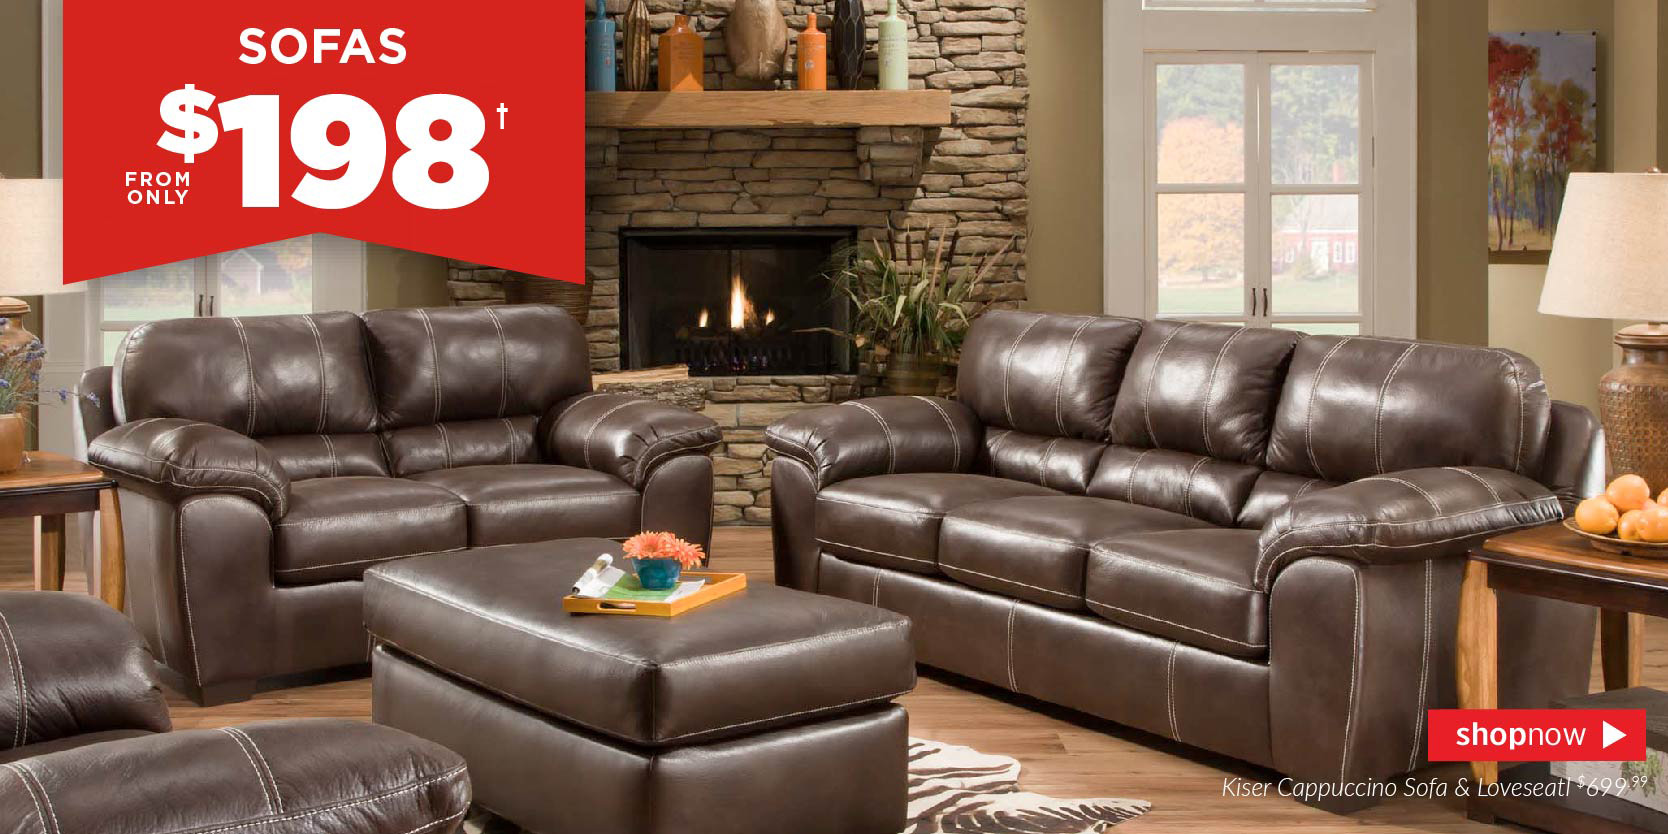 Sofas from only $198